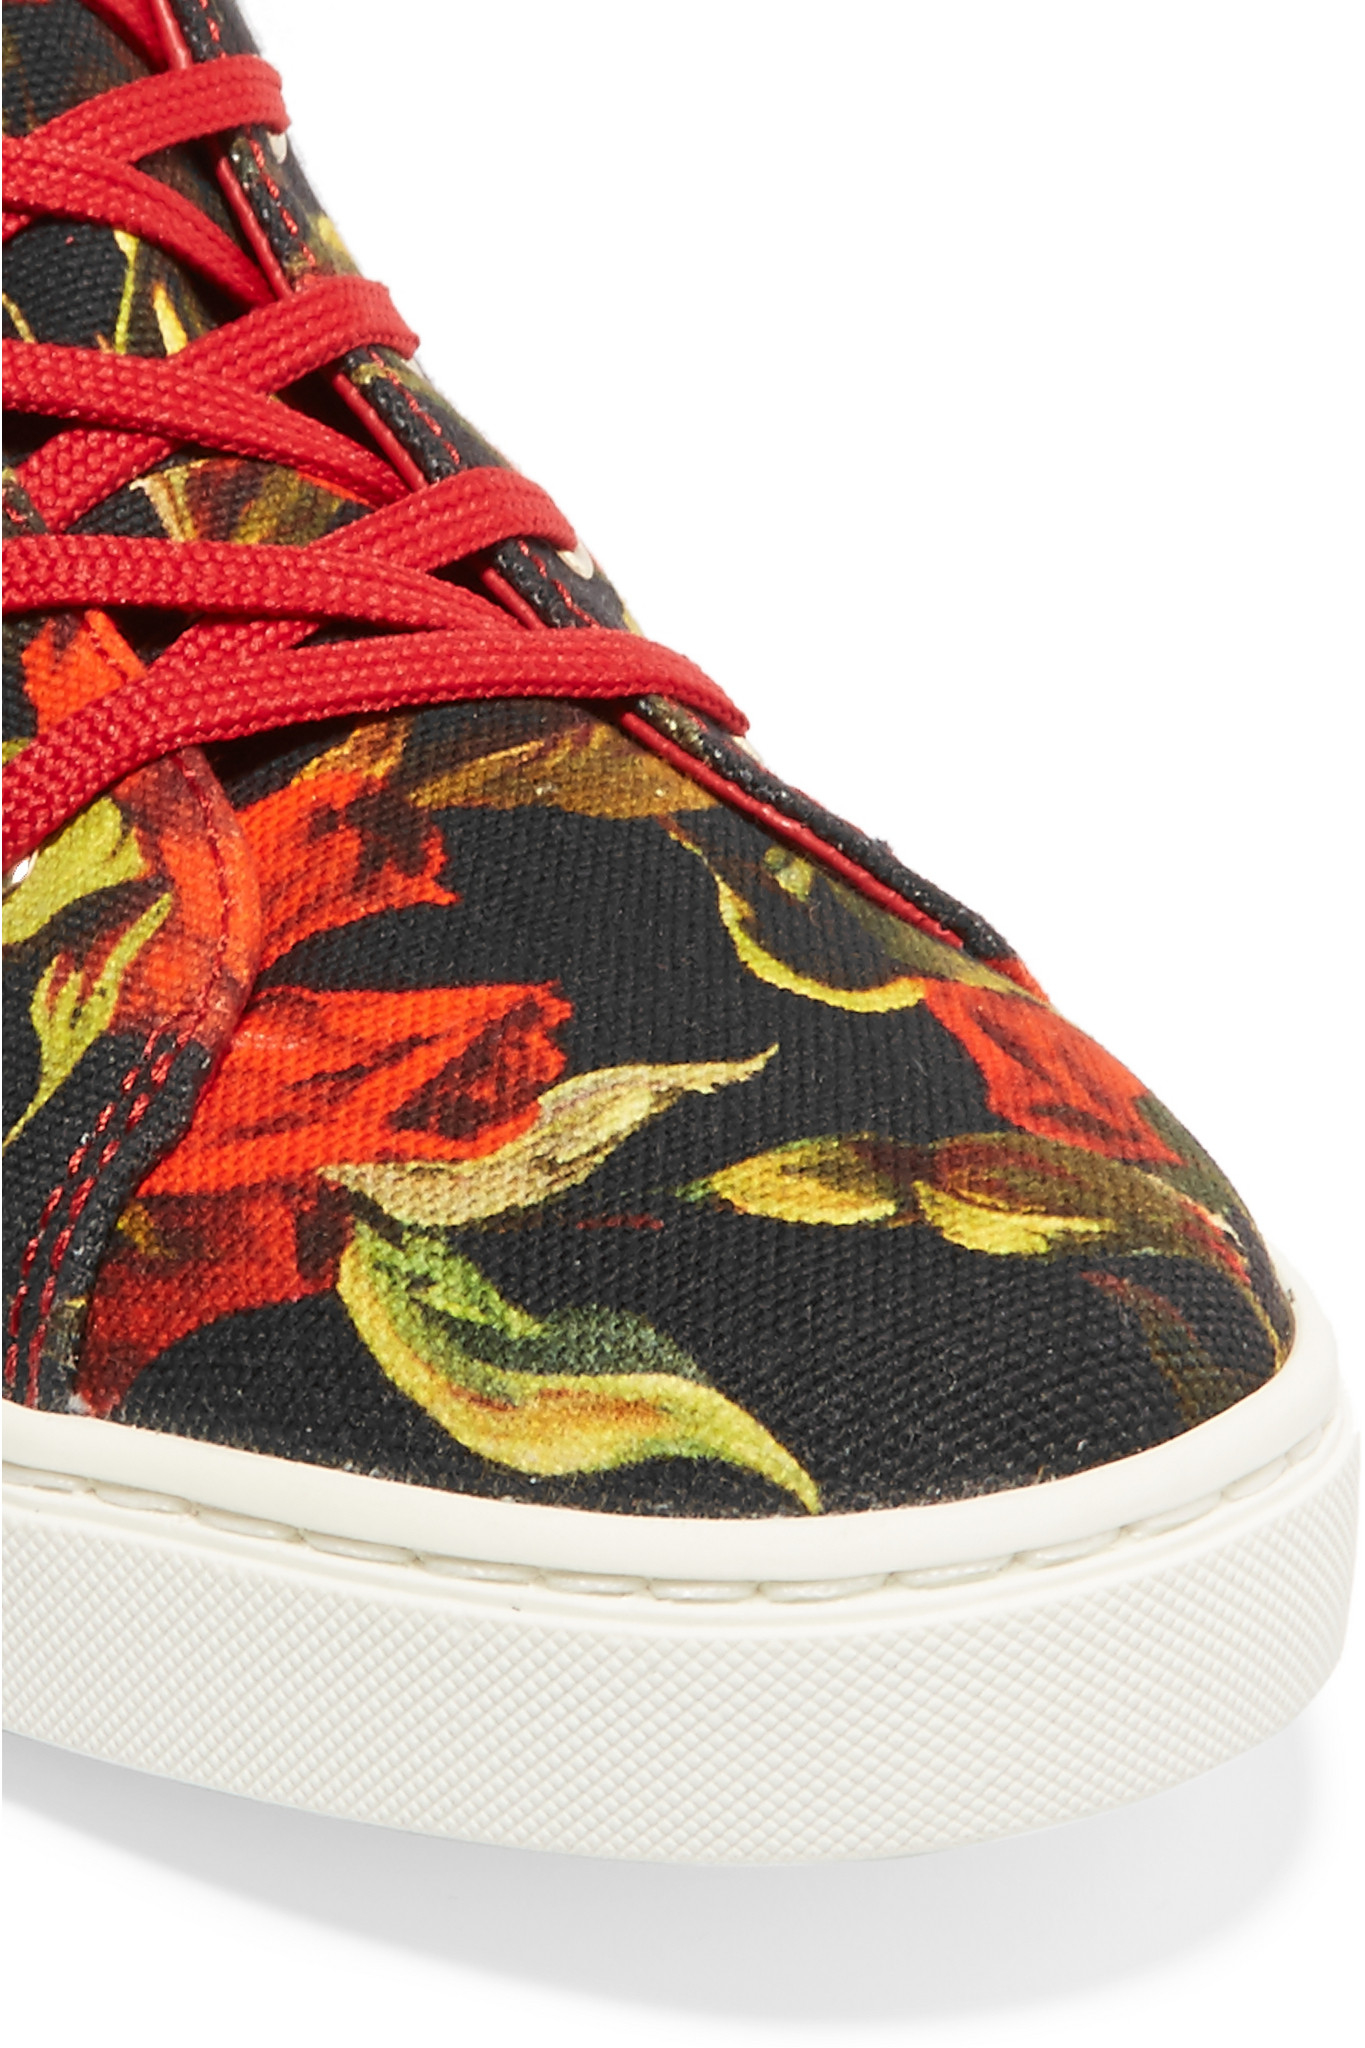 Download Dolce & Gabbana Floral-print Canvas High-top Sneakers in ...